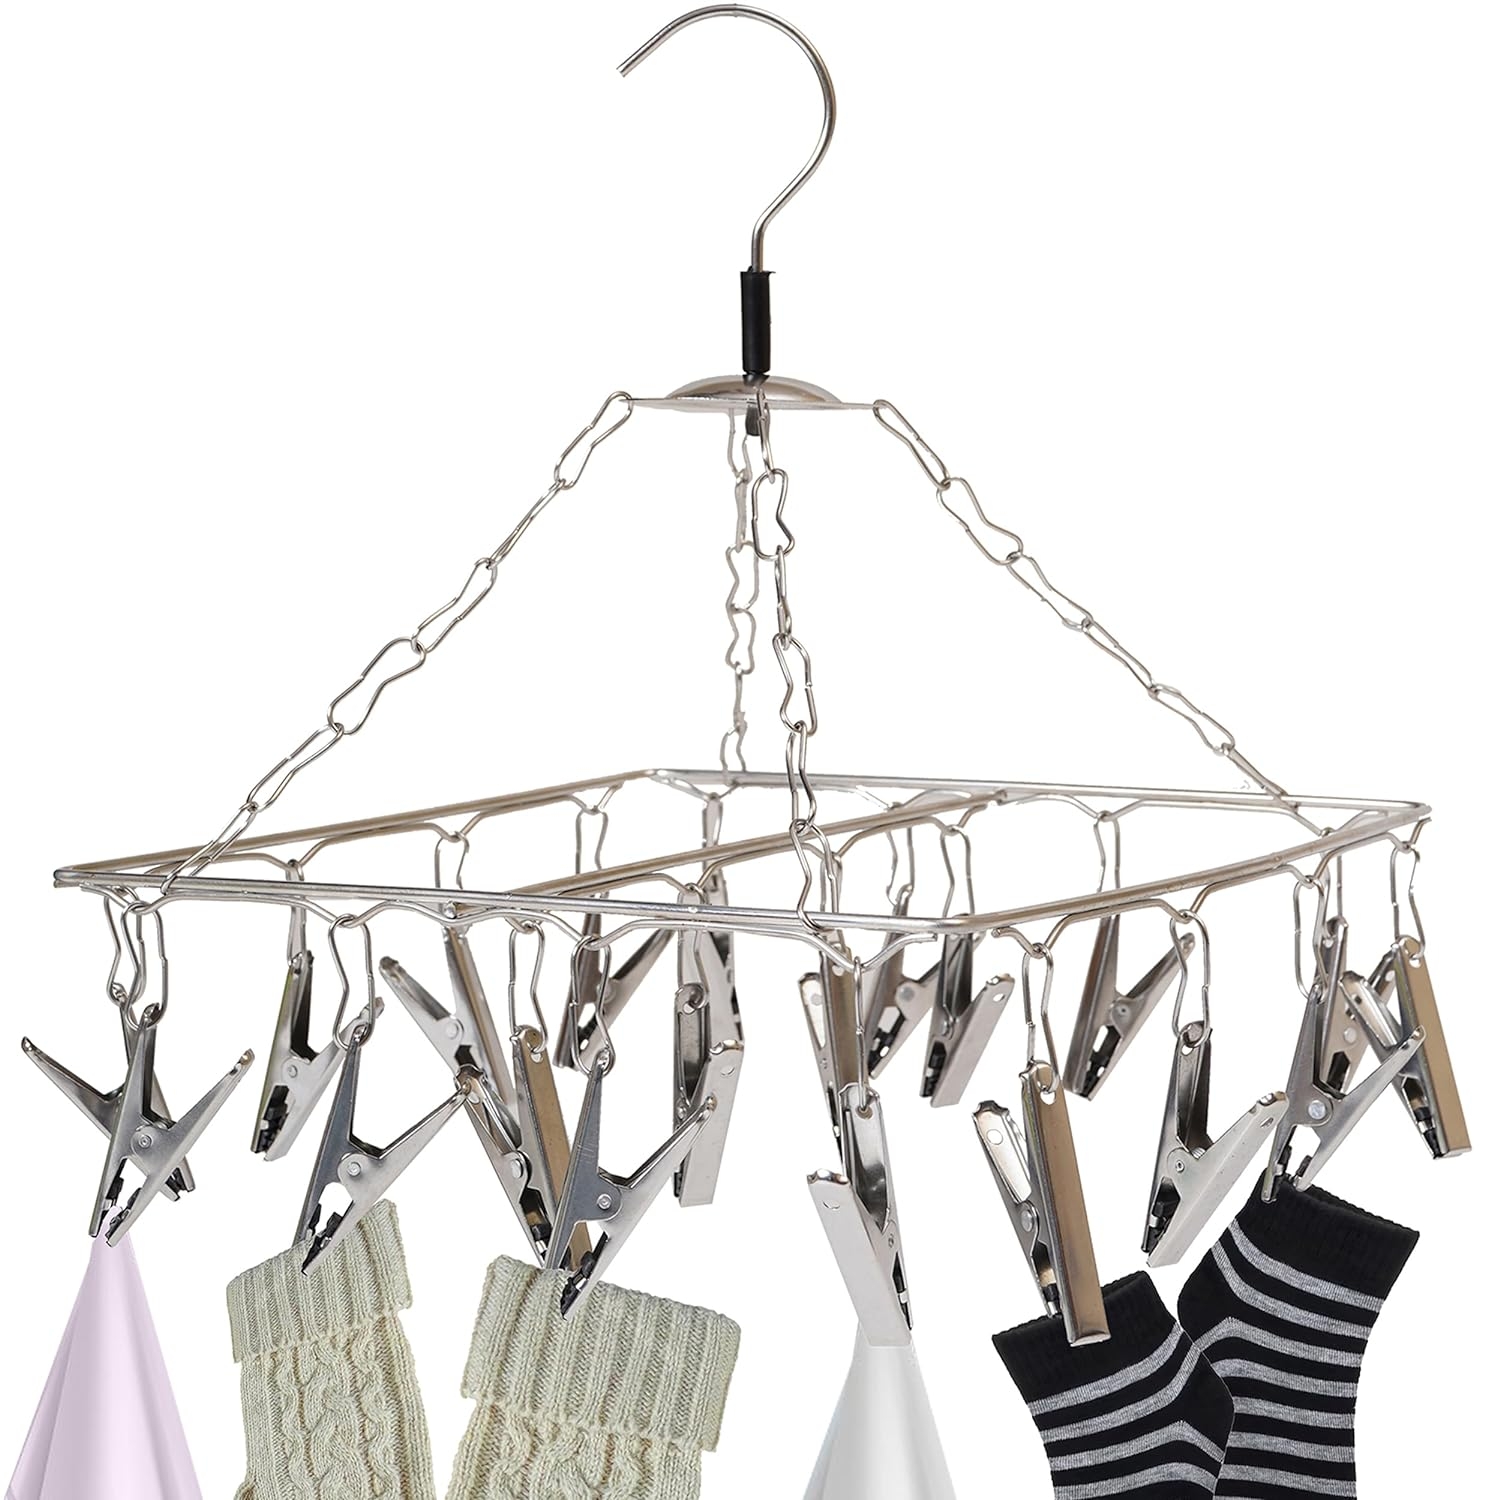 Stainless Steel Square Cloth drying Hanger/Stand with 20 Clips | Baby Clothes Dryer/Undergarments Hanger